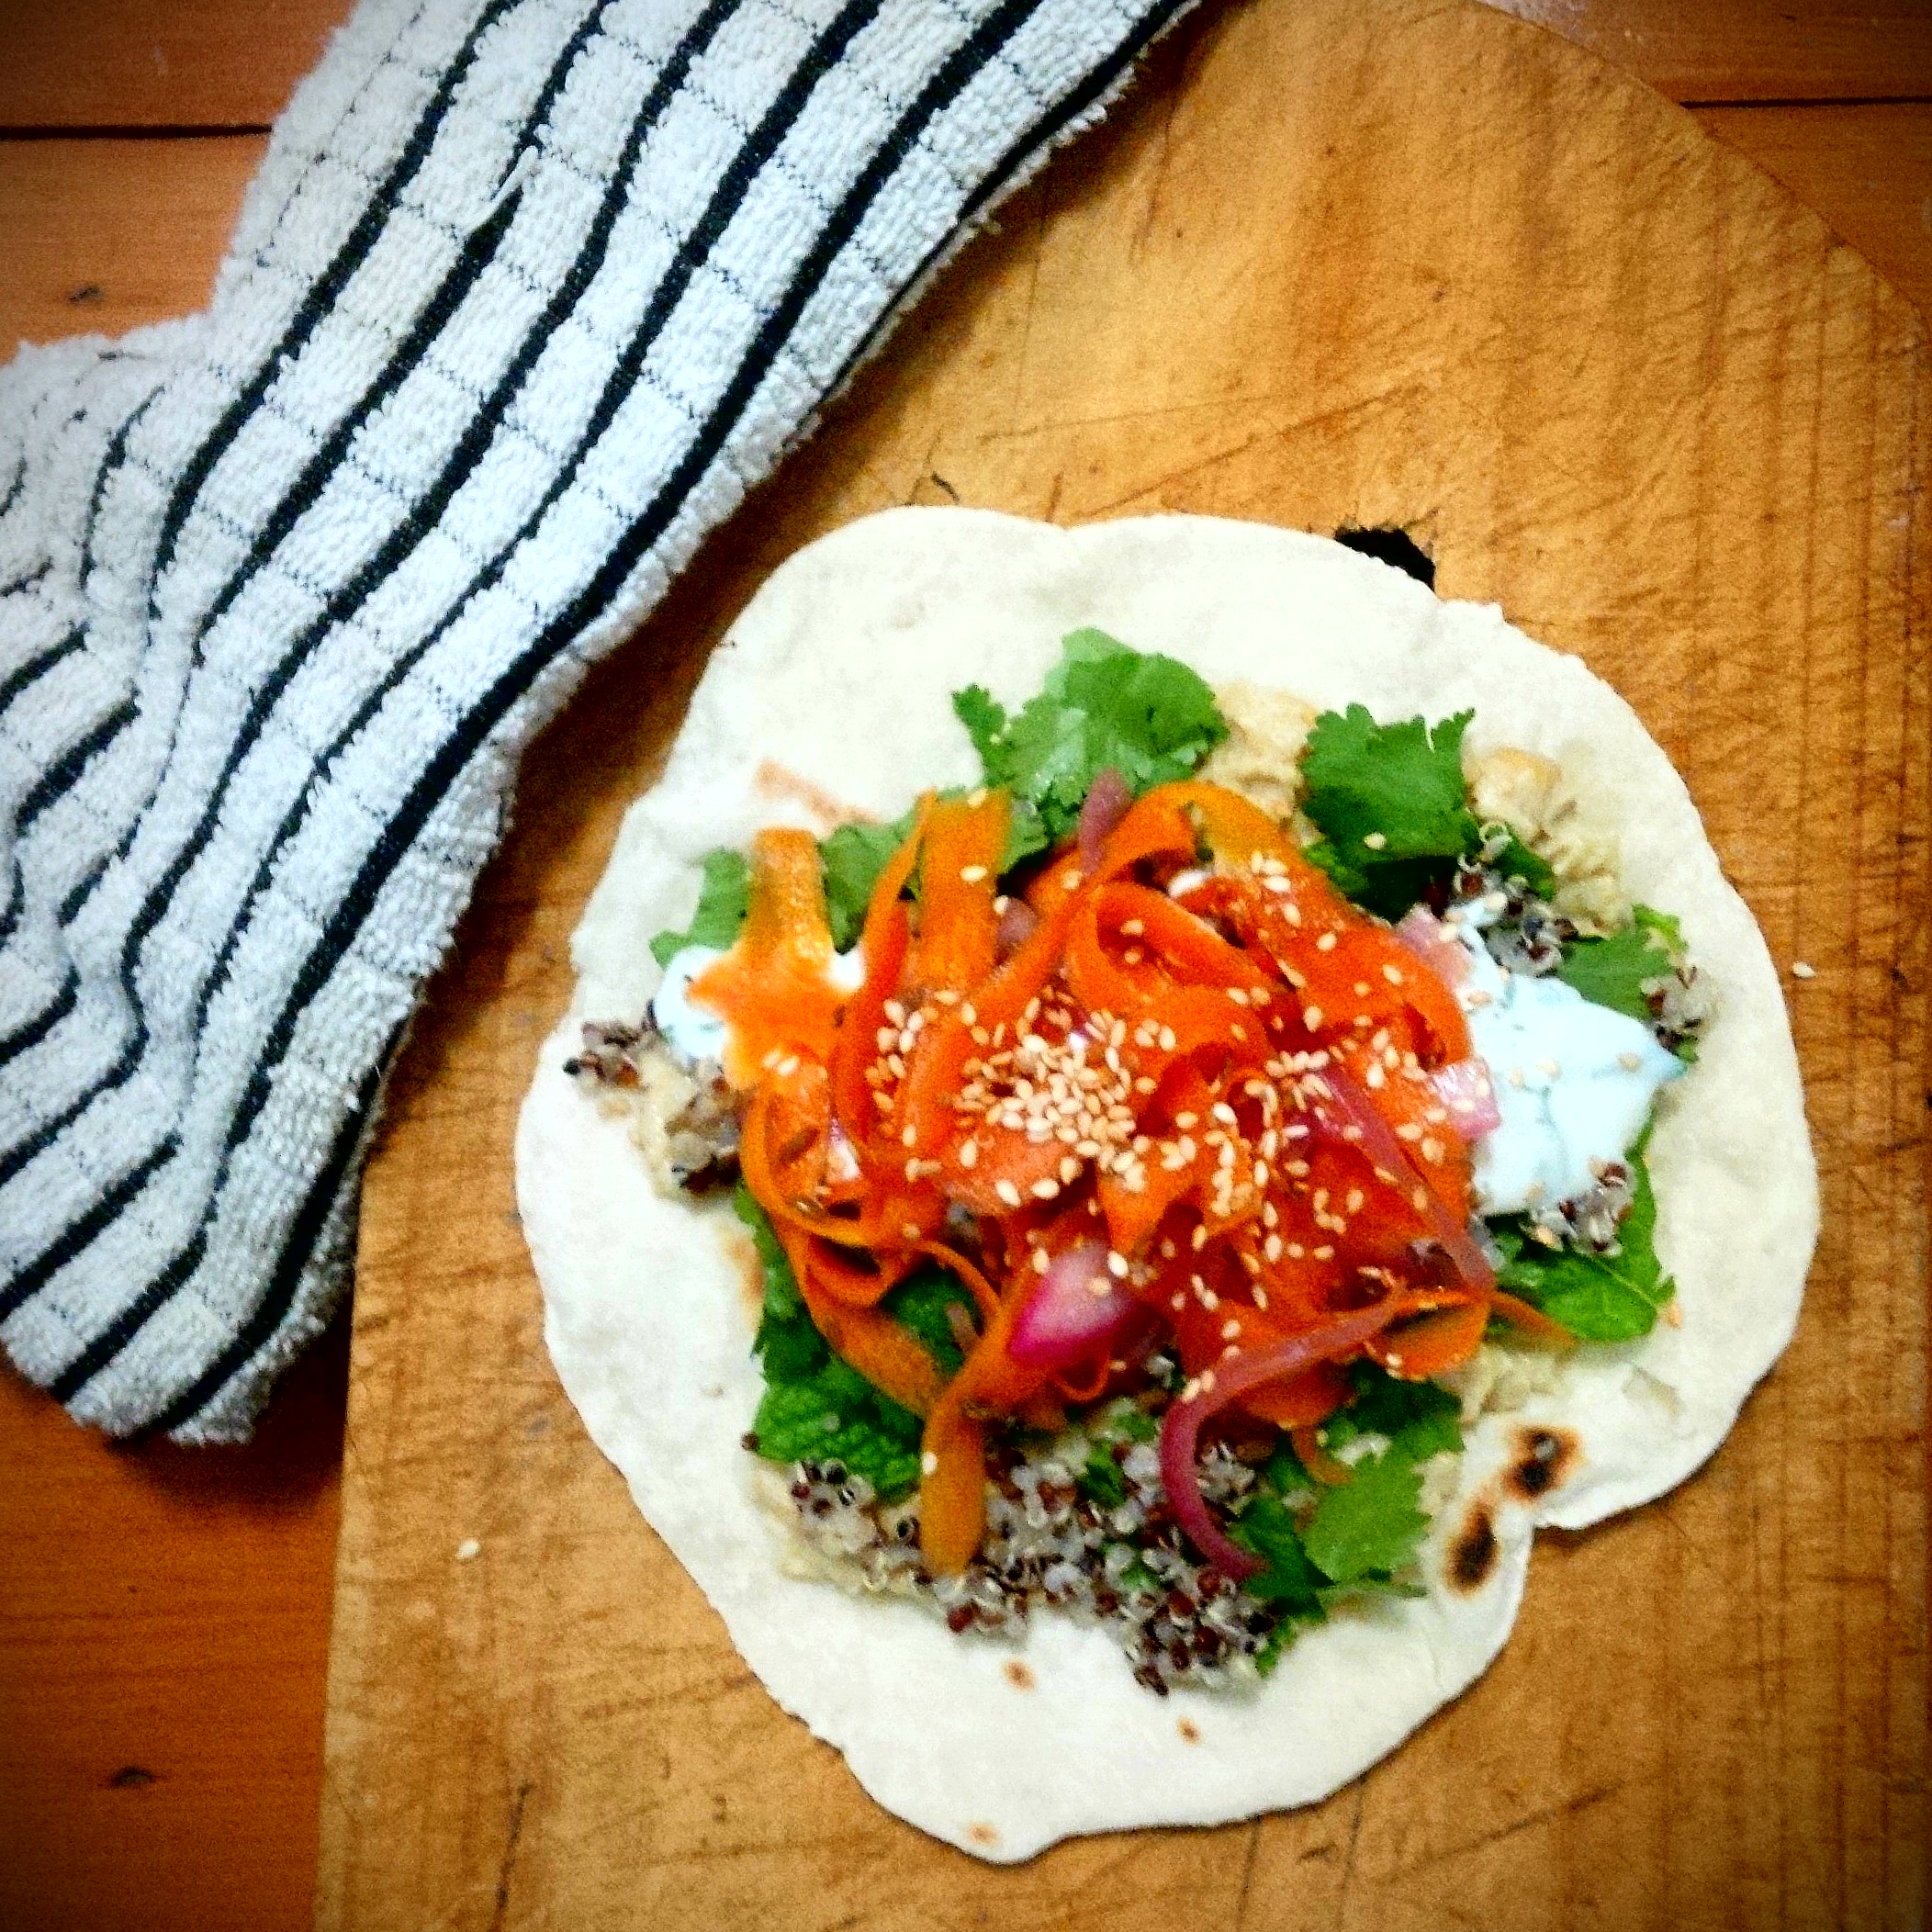 Homemade Flatbread with Quinoa, Quick-Pickled Veg & Herbs